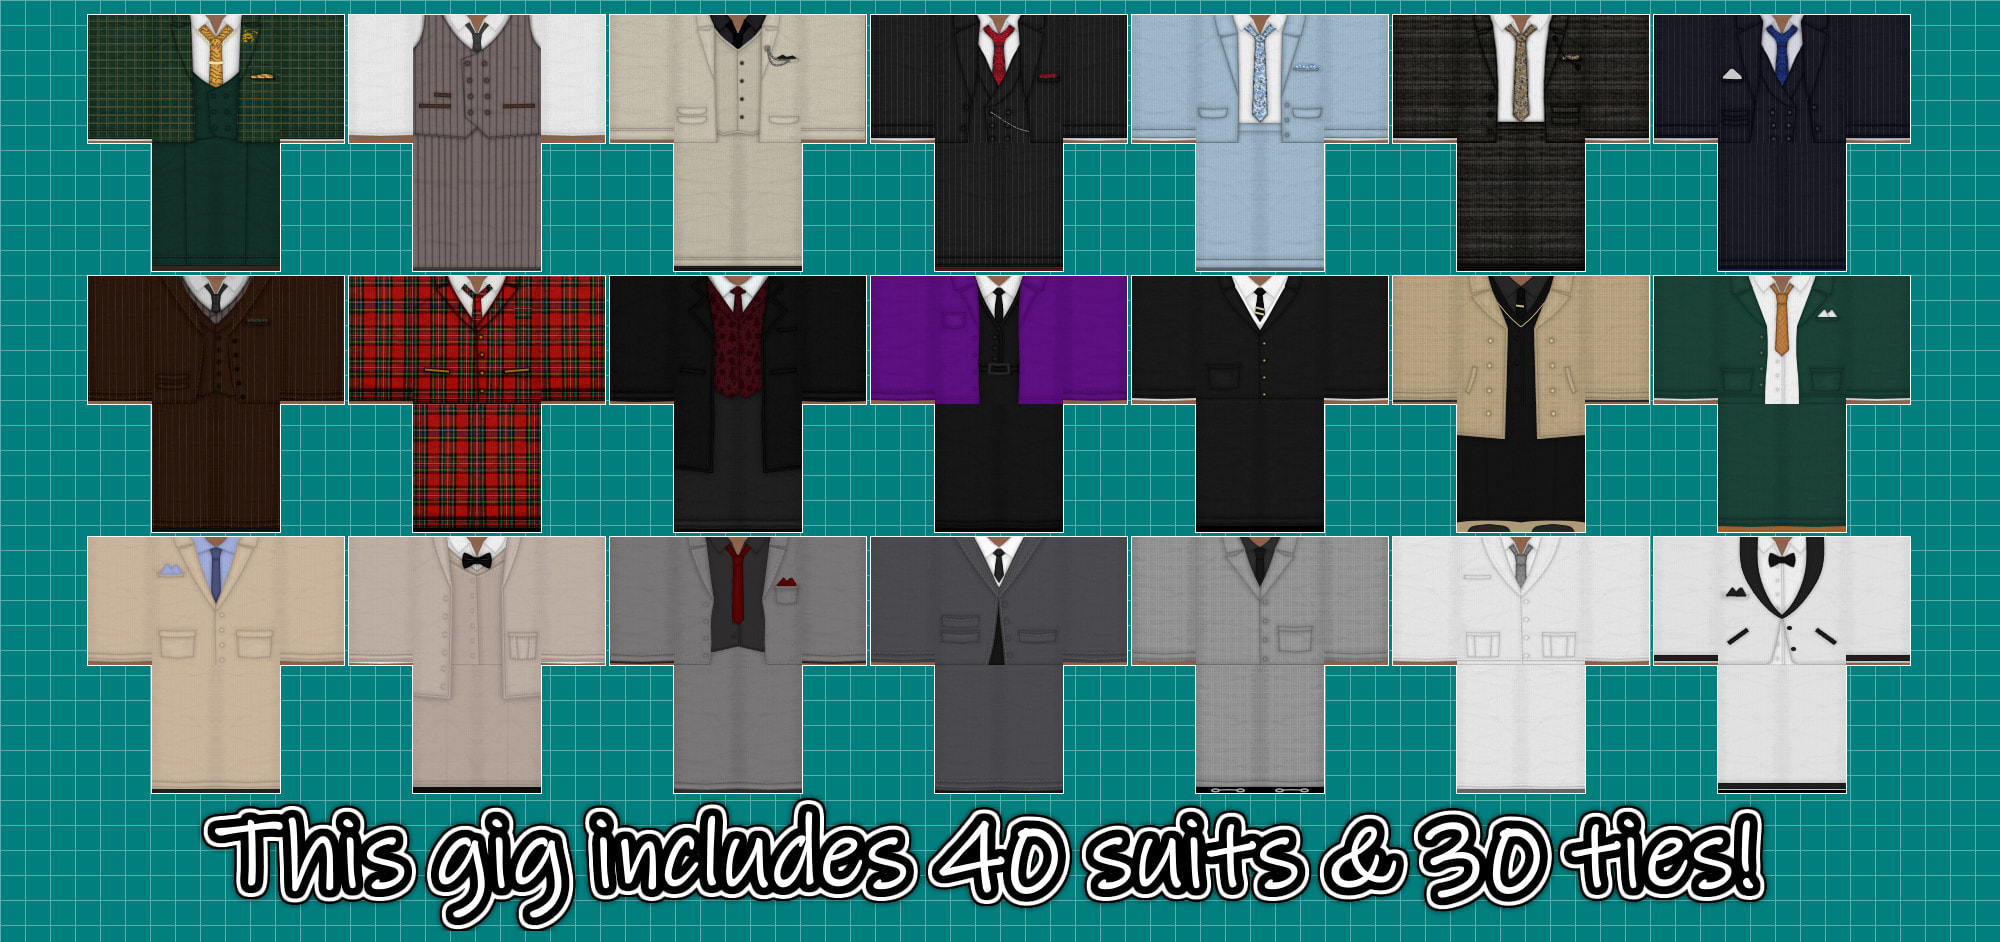 Roblox Clothing Templates, Roblox Clothing